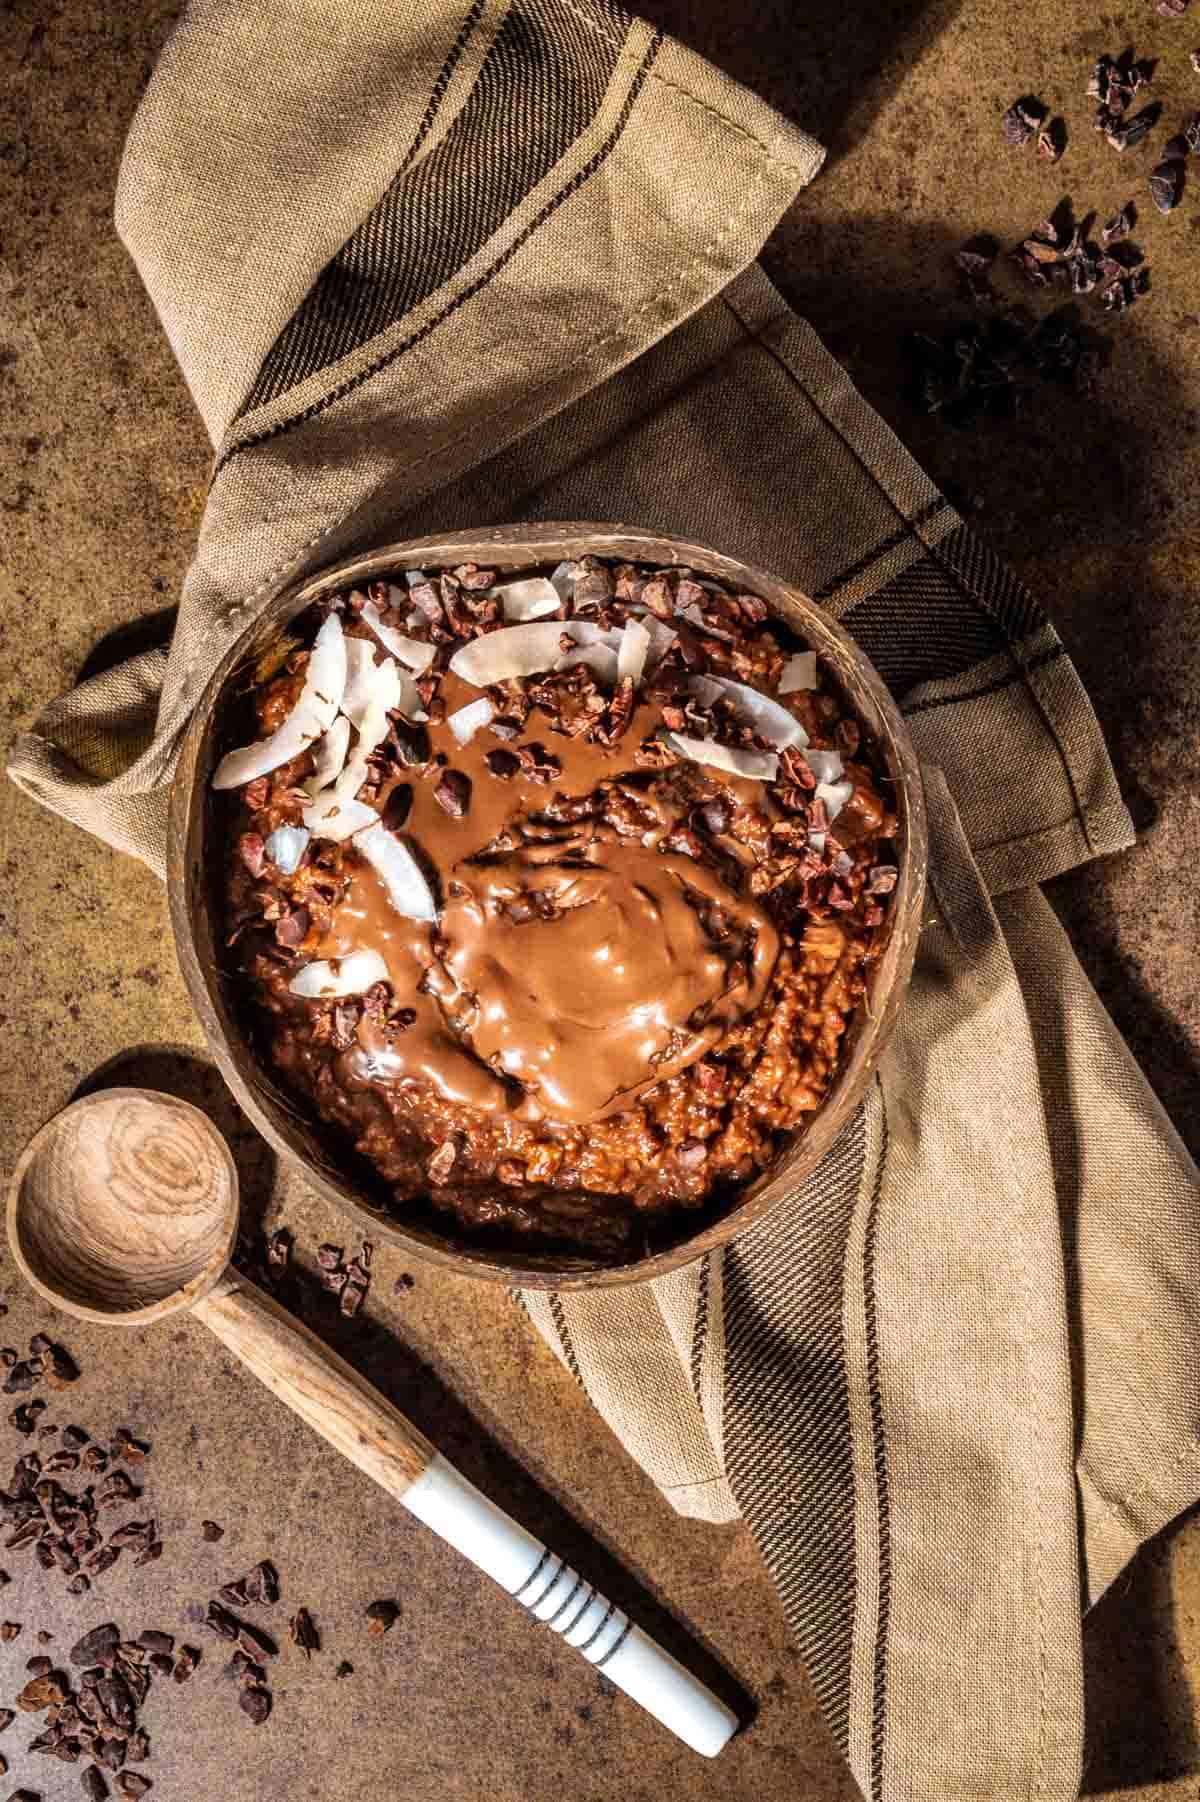 Chocolate porridge in a bowl, topped with Nutella.